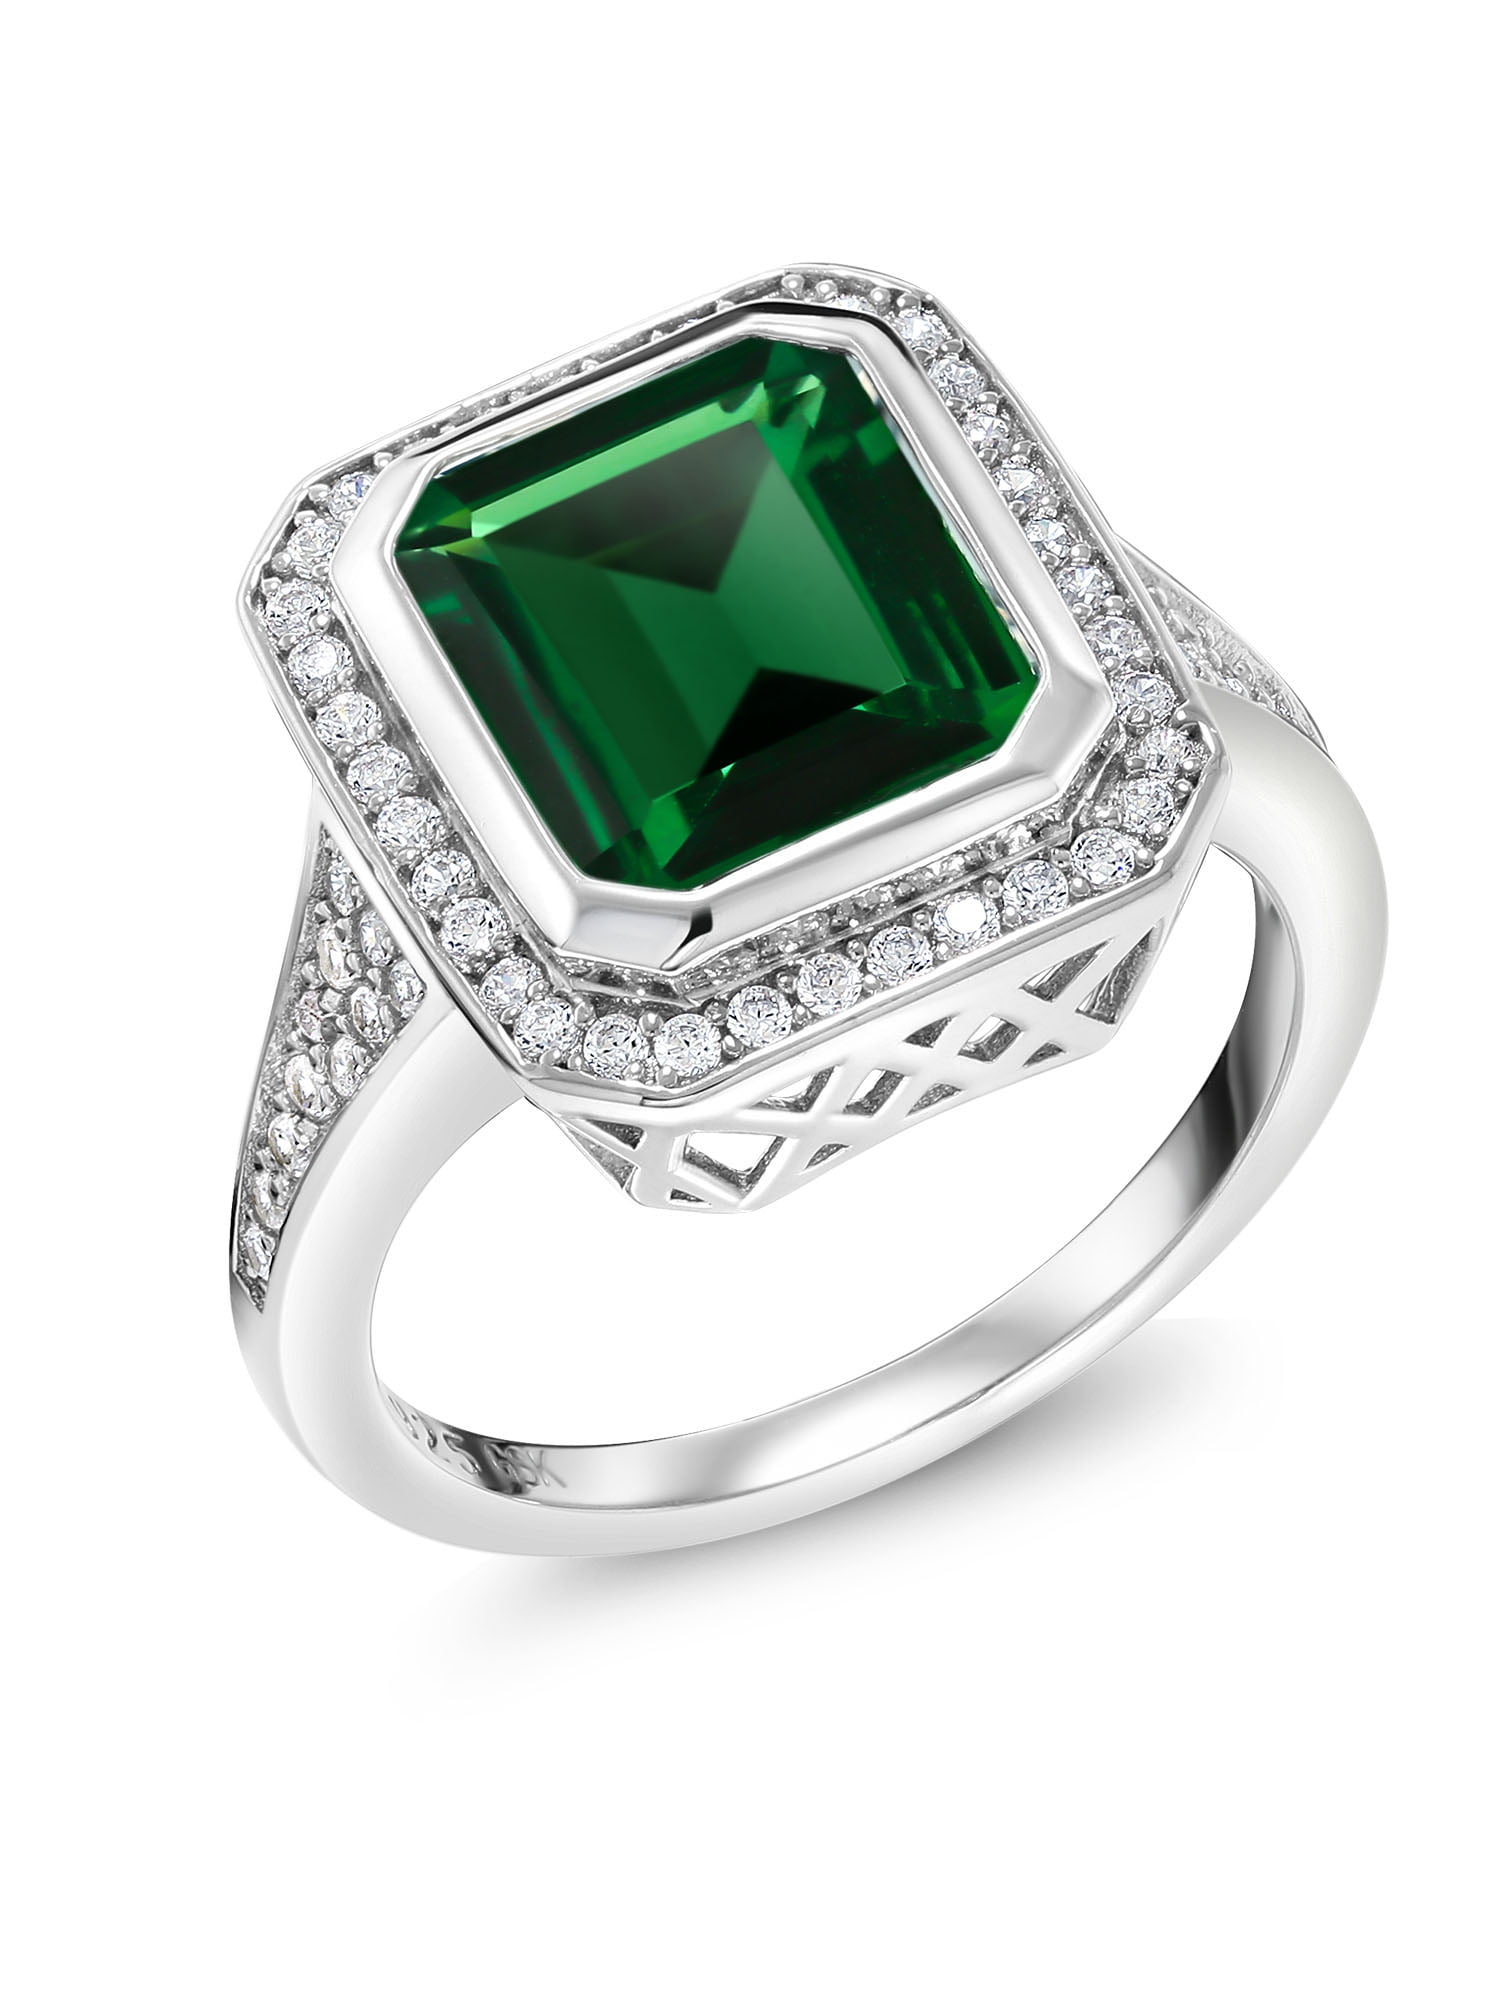 7.00 Carats Simulated Emerald Engagement Ring Sterling Silver Sizes 5 to 9 